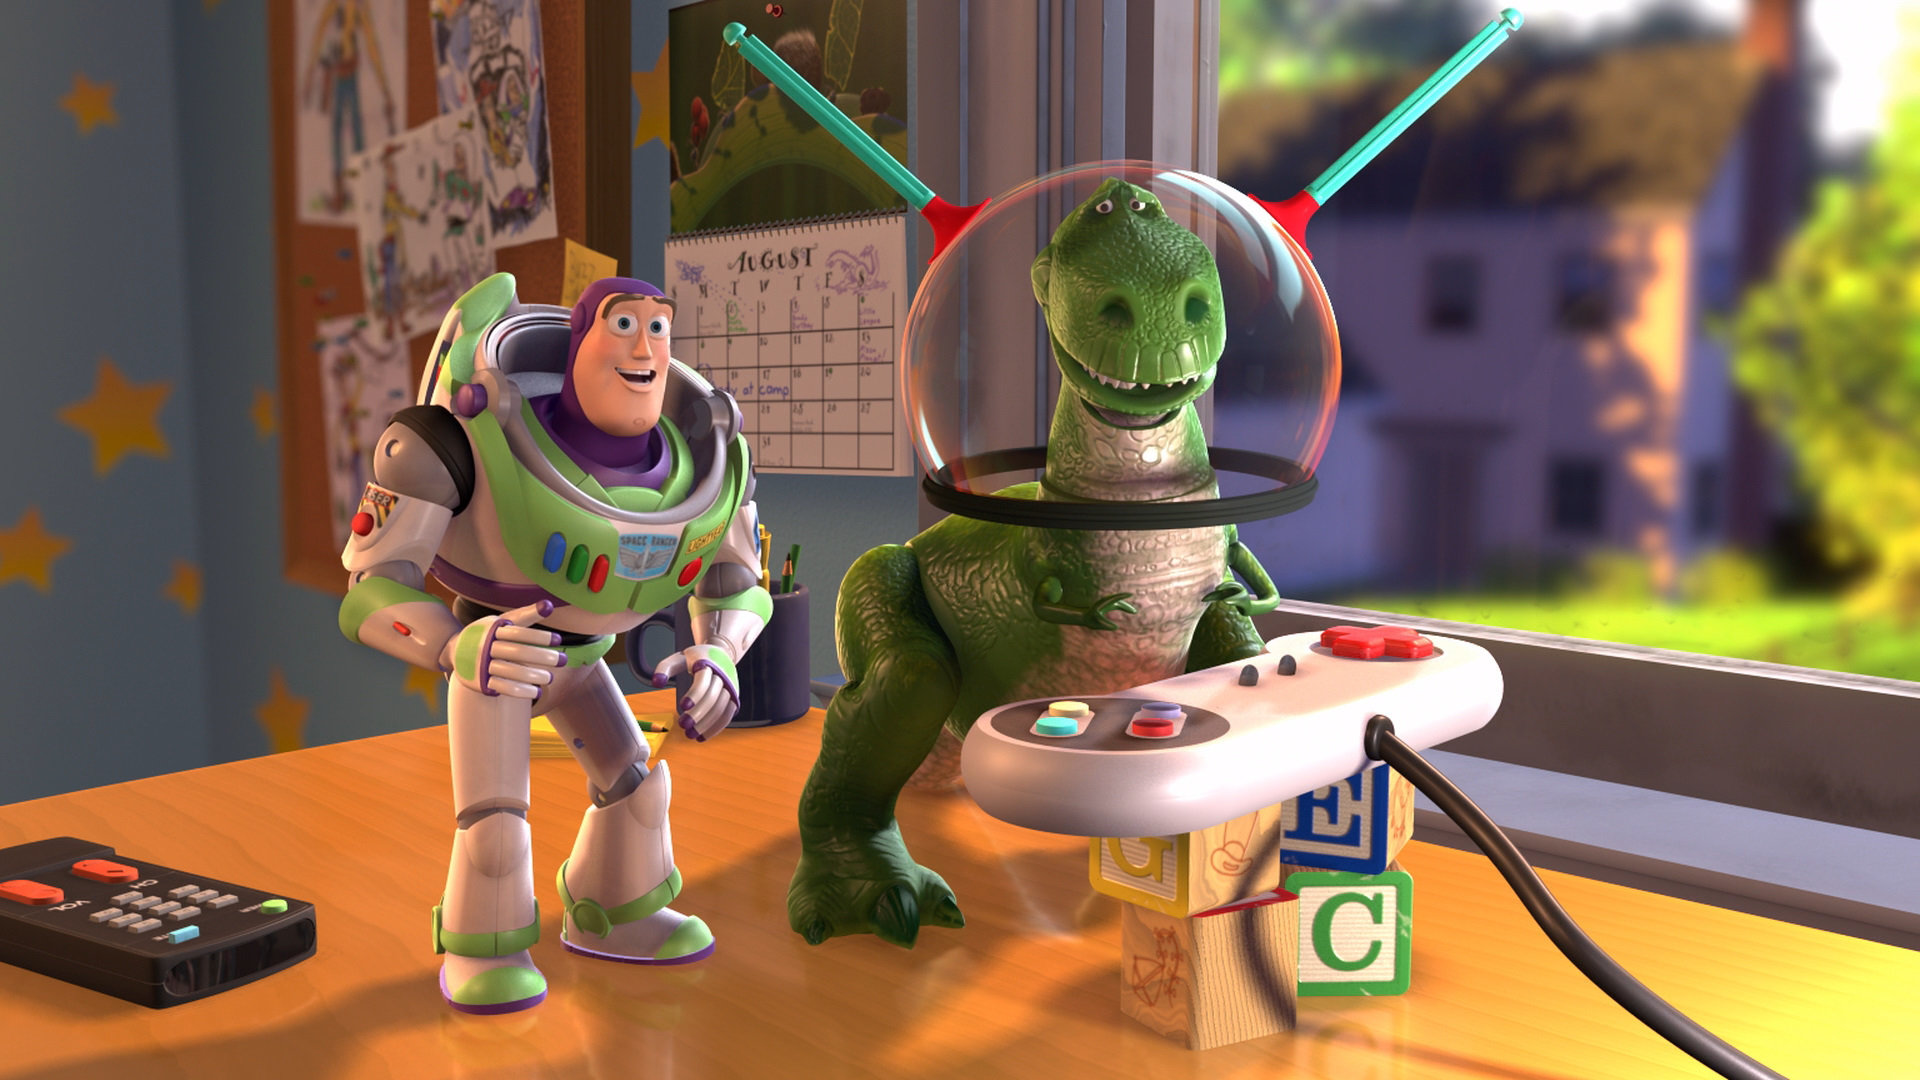 Best Toy Story wallpaper ID:166276 for High Resolution hd 1080p computer